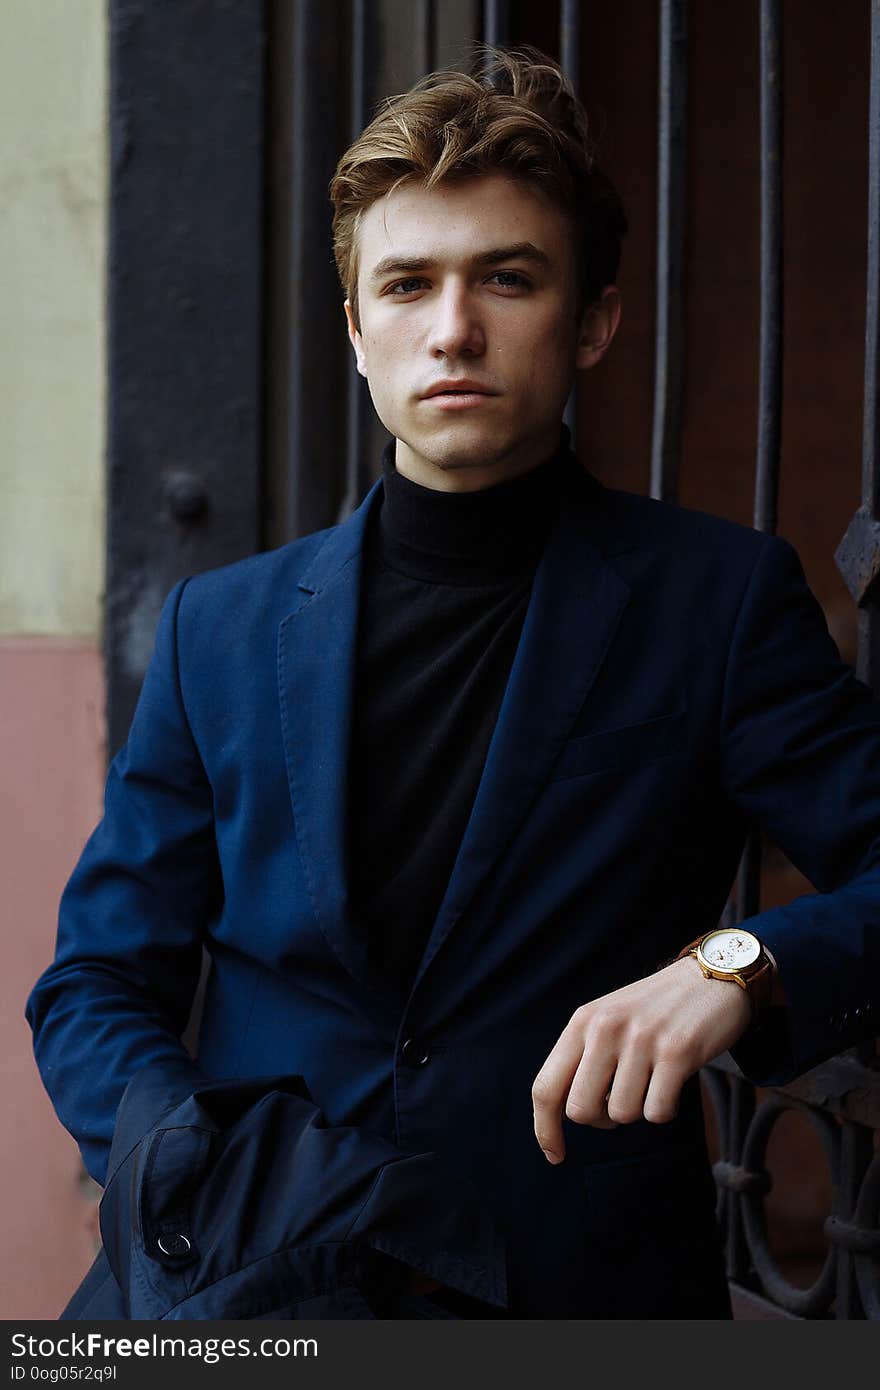 Portrait of an attractive man in a suit and a black sweater, close-up, on his hand a gold watch,brooding pose, looking at the camera.